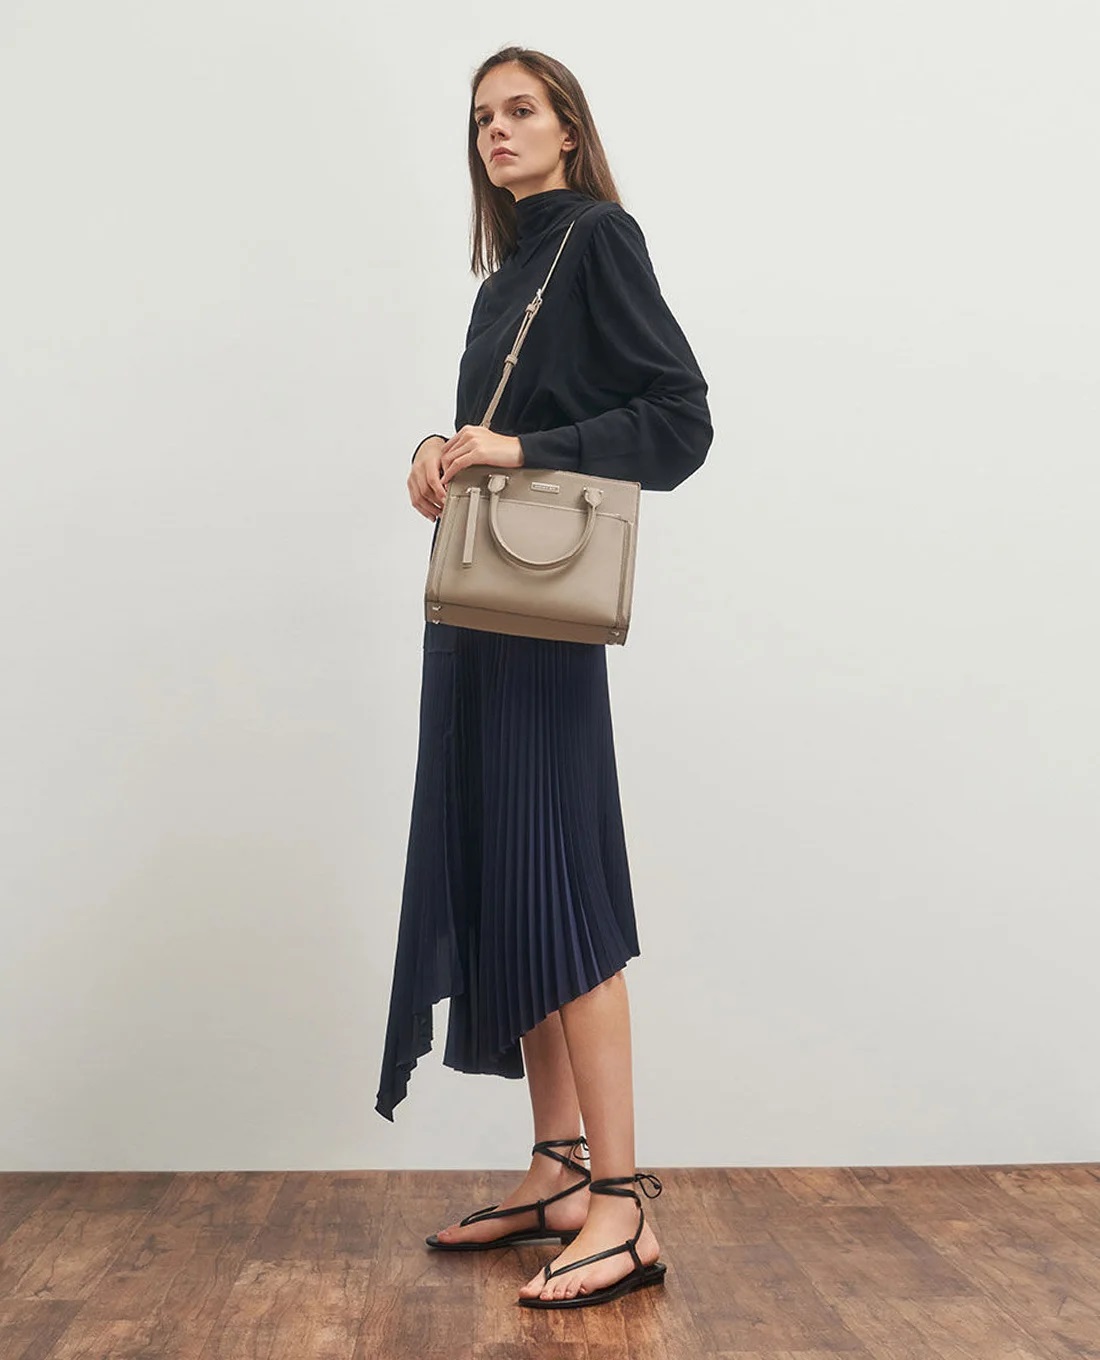 TÚI CHARLES KEITH DOUBLE HANDLE FRONT ZIP TOTE BAG 19